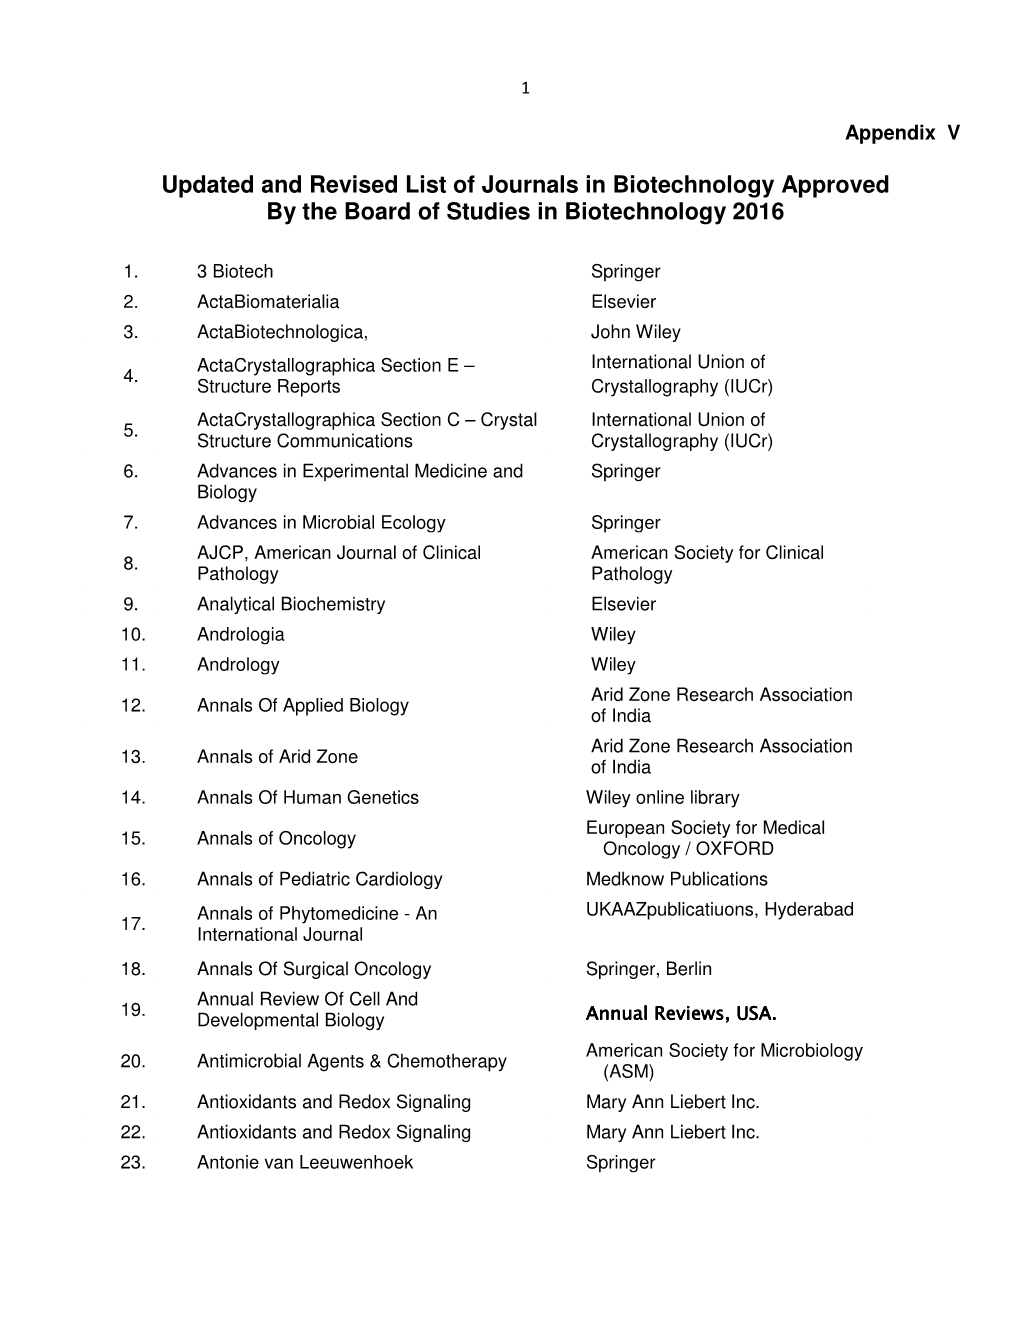 Updated and Revised List of Journals in Biotechnology Approved by the Board of Studies in Biotechnology 2016